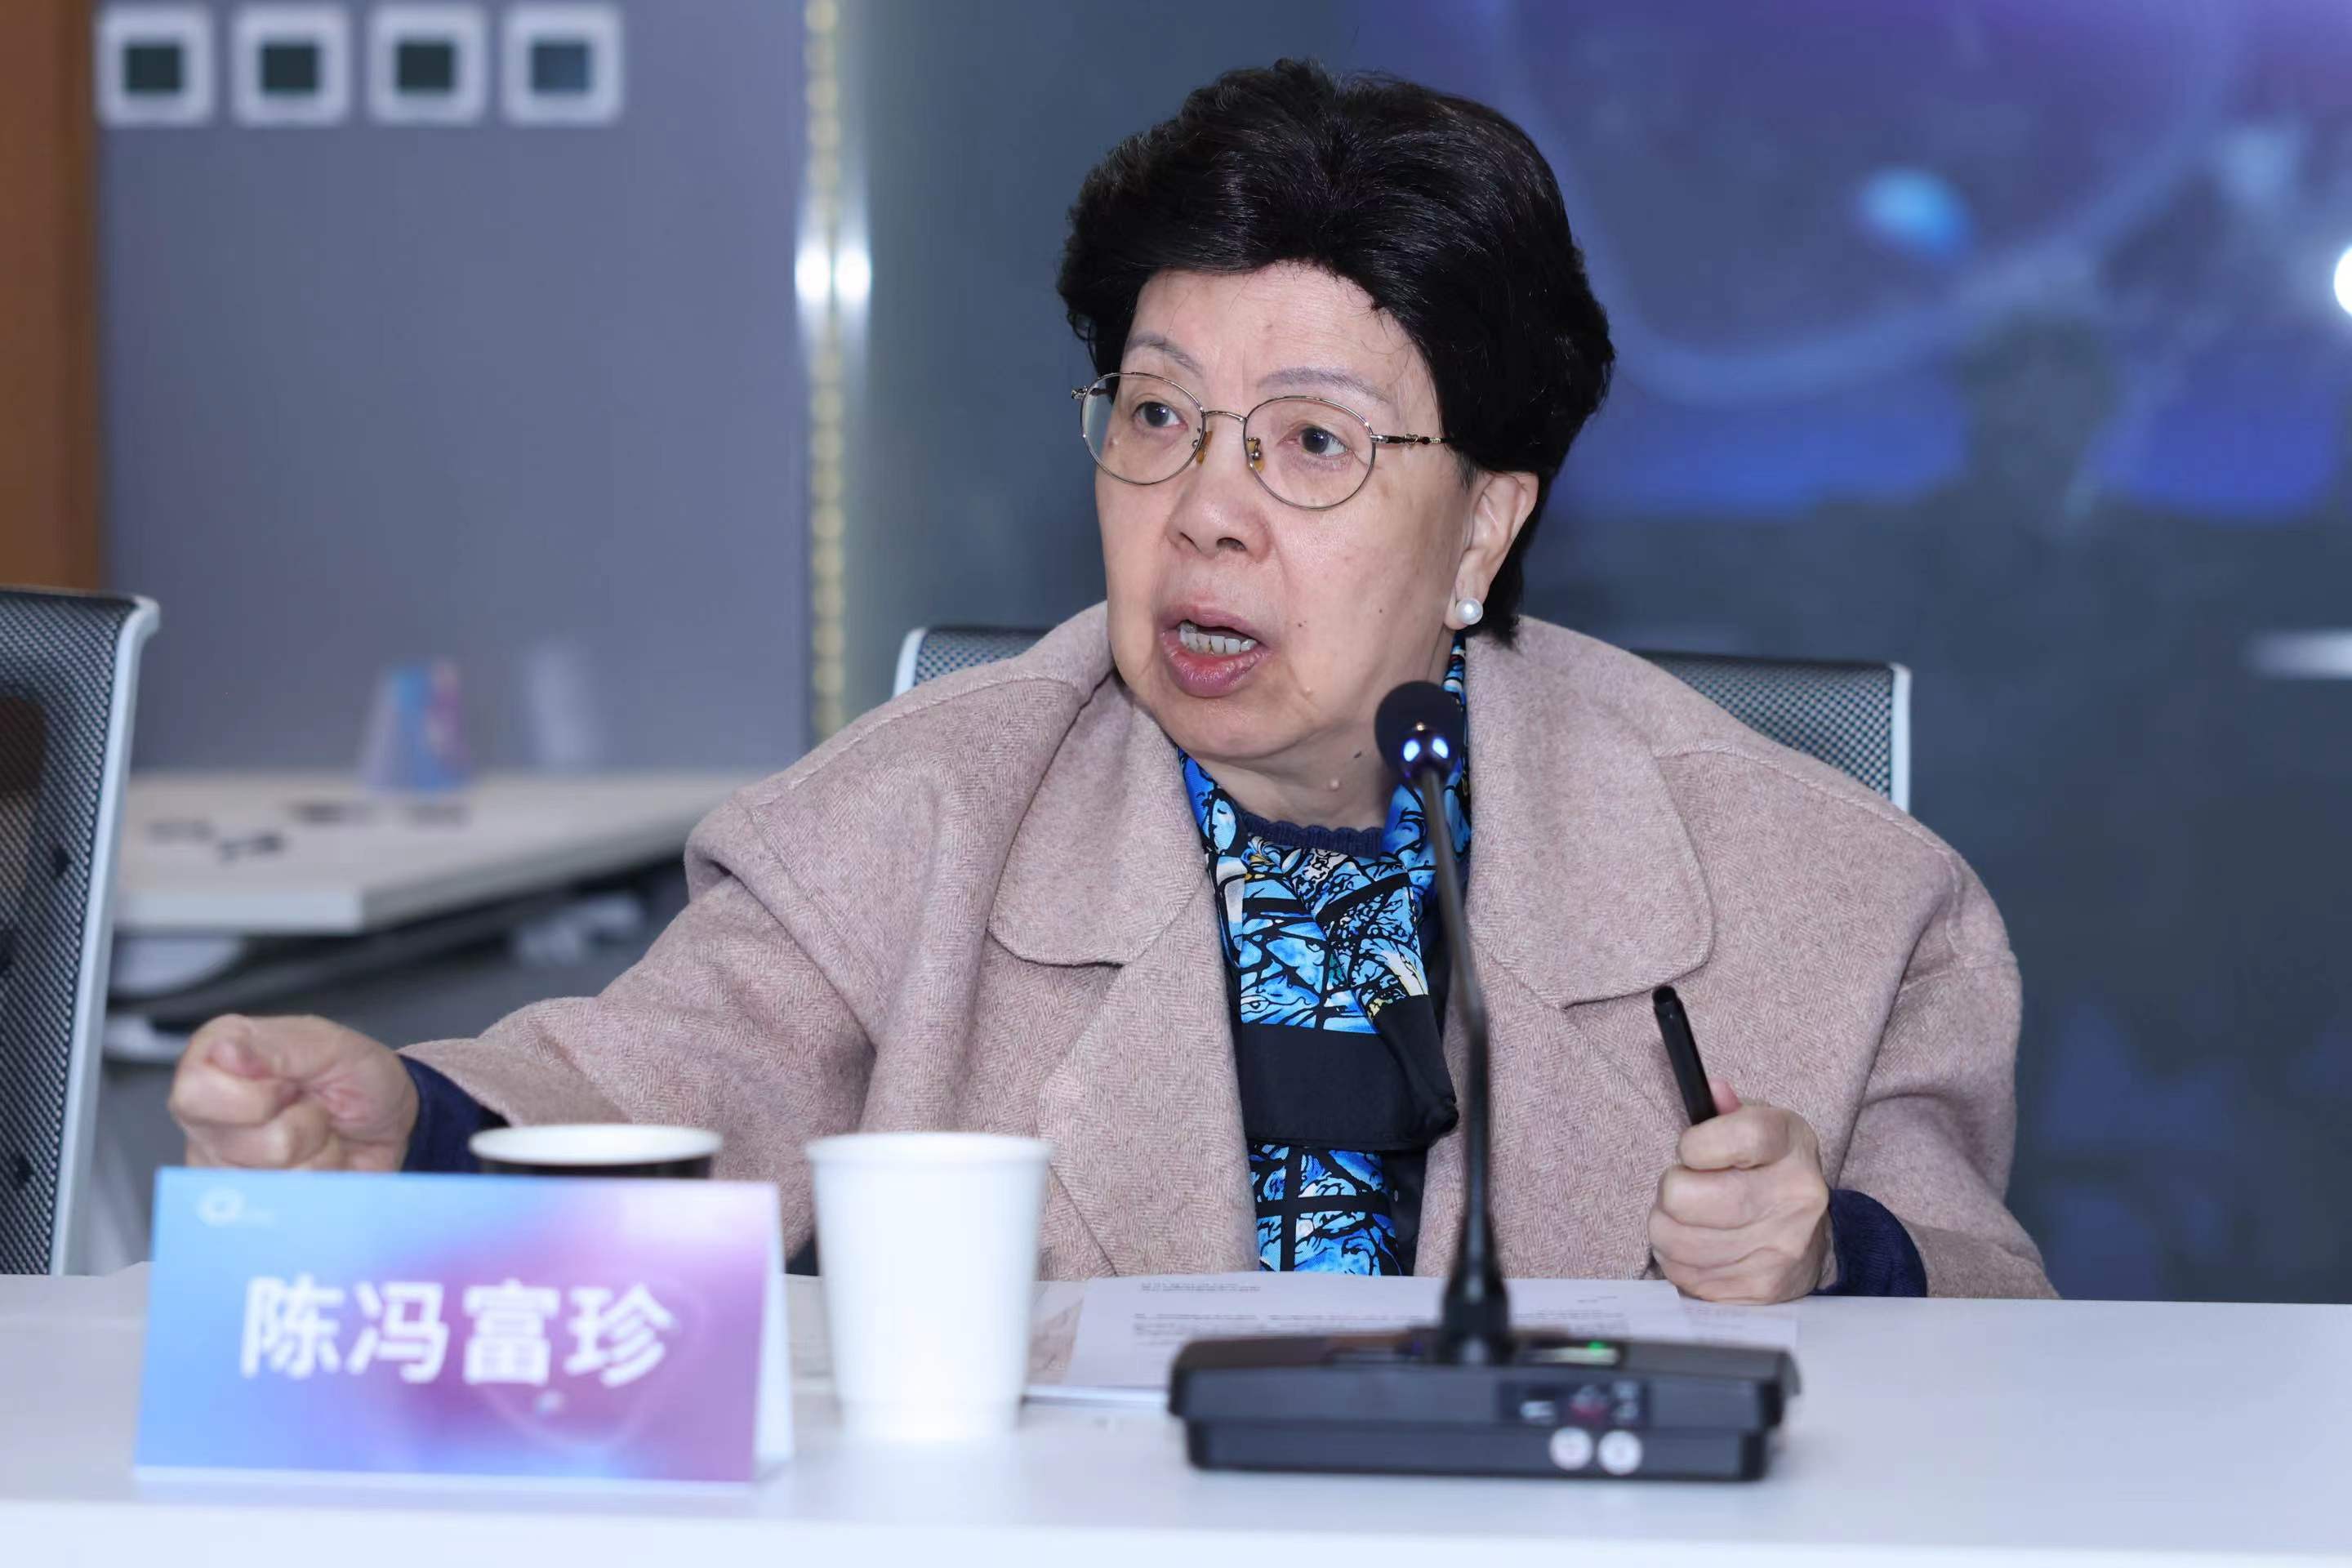 Margaret Chan Fung Fu-chun, former director-general of the World Health Organization, speaks at the media briefing ahead of the third World Health Forum in Beijing, October 25, 2023. /Tsinghua University